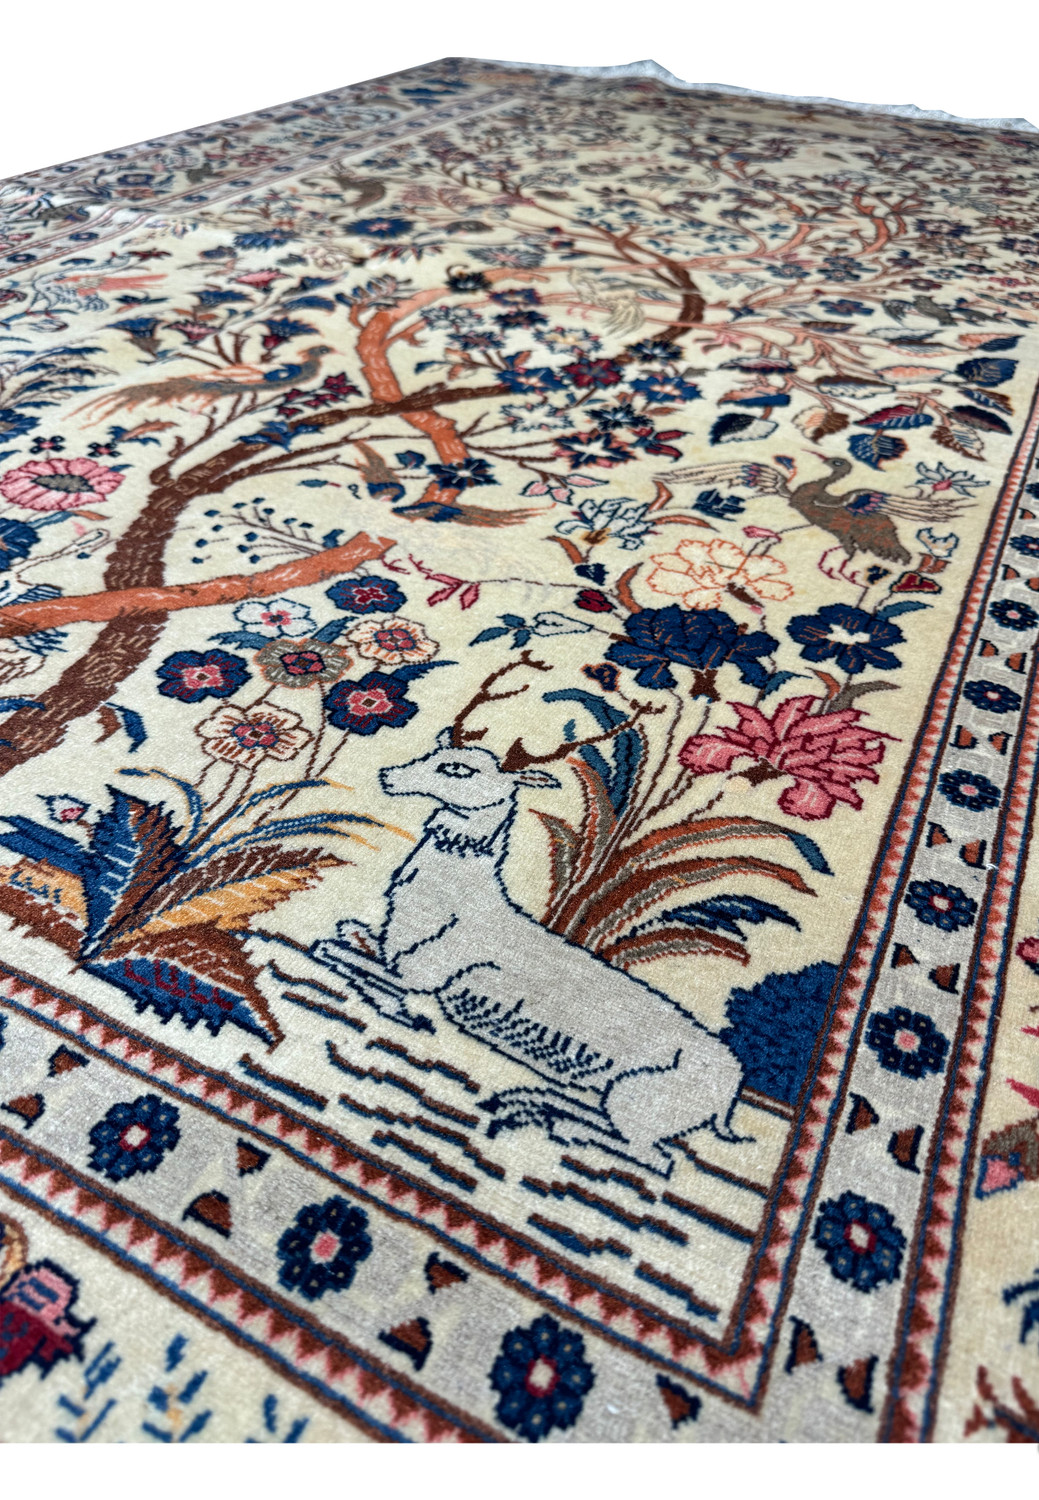 Magnified view of the Tree of Life central motif on an Antique Persian Kashan rug, with detailed depiction of birds in the branches and animals on the ground.